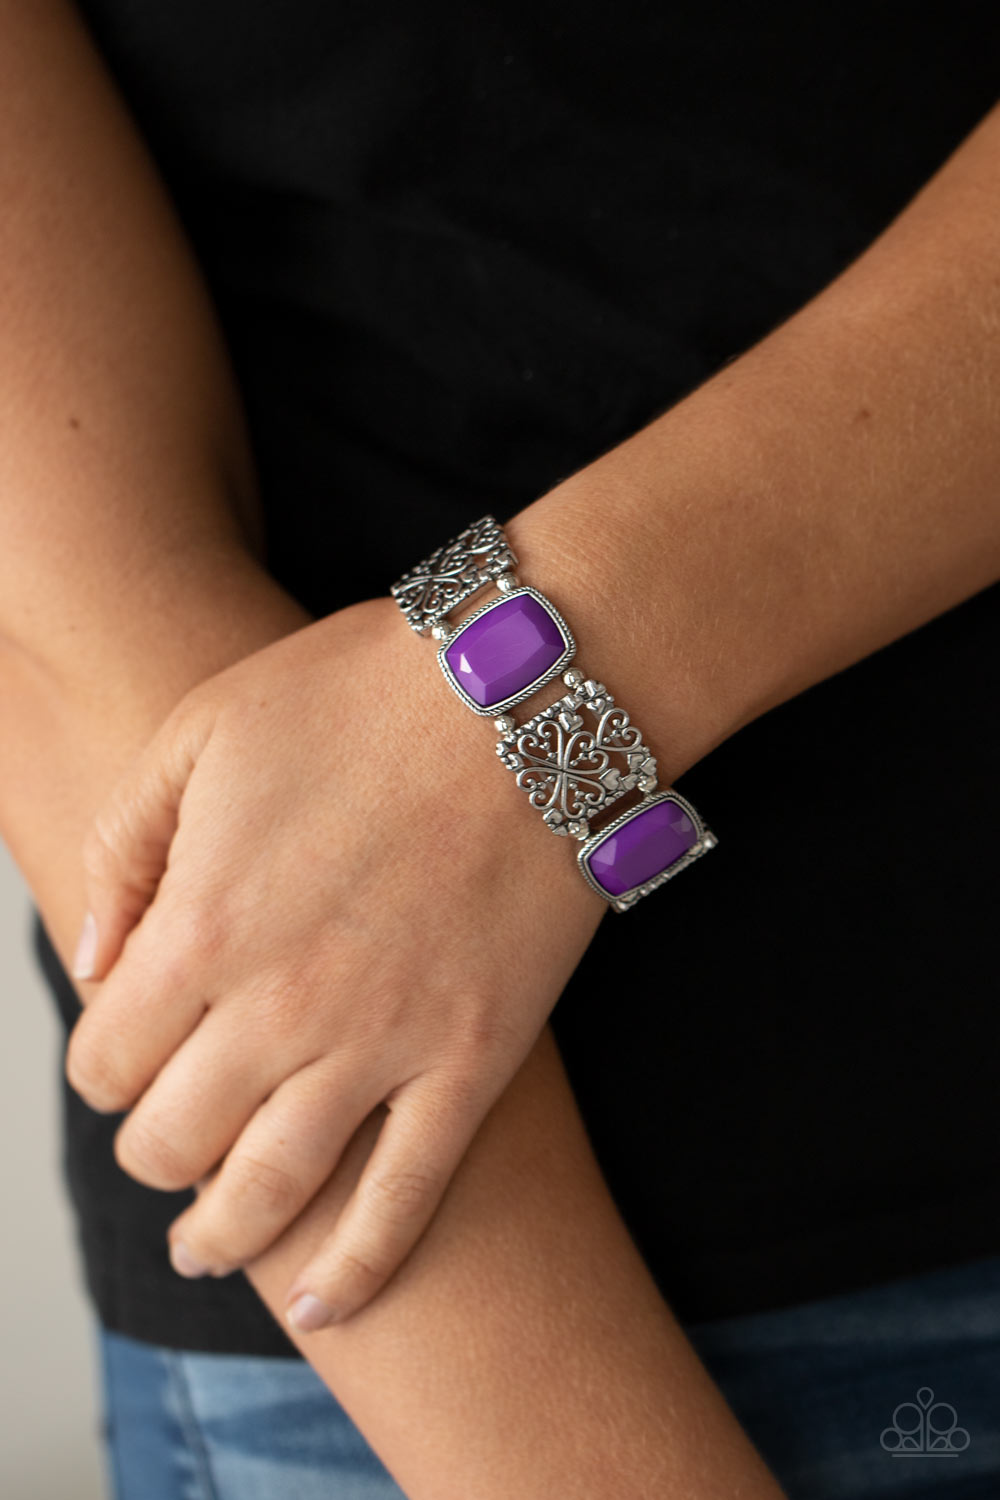 Colorful Coronation - Purple and Silver - Stretchy Bracelet - Paparazzi Accessories - 
Infused with dainty silver heart accents, whimsically filled silver filigree frames and faceted Amethyst Orchid beads are threaded along stretchy bands around the wrist for a colorful flair. Sold as one individual bracelet.
